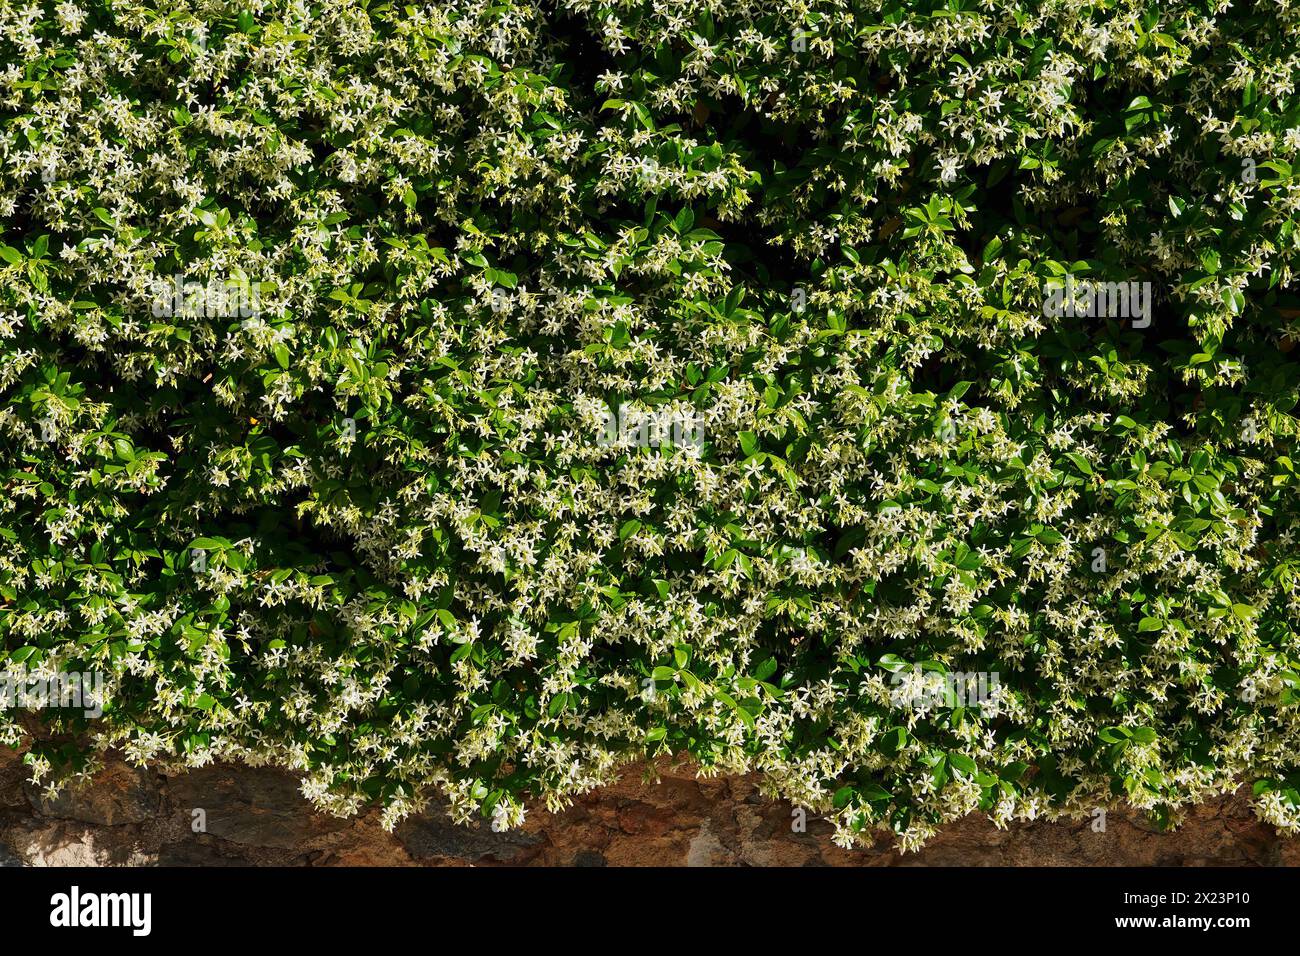 Southern or star jasmine, or Rhynchospermum jasminoides, in full bloom, covering a wall Stock Photo